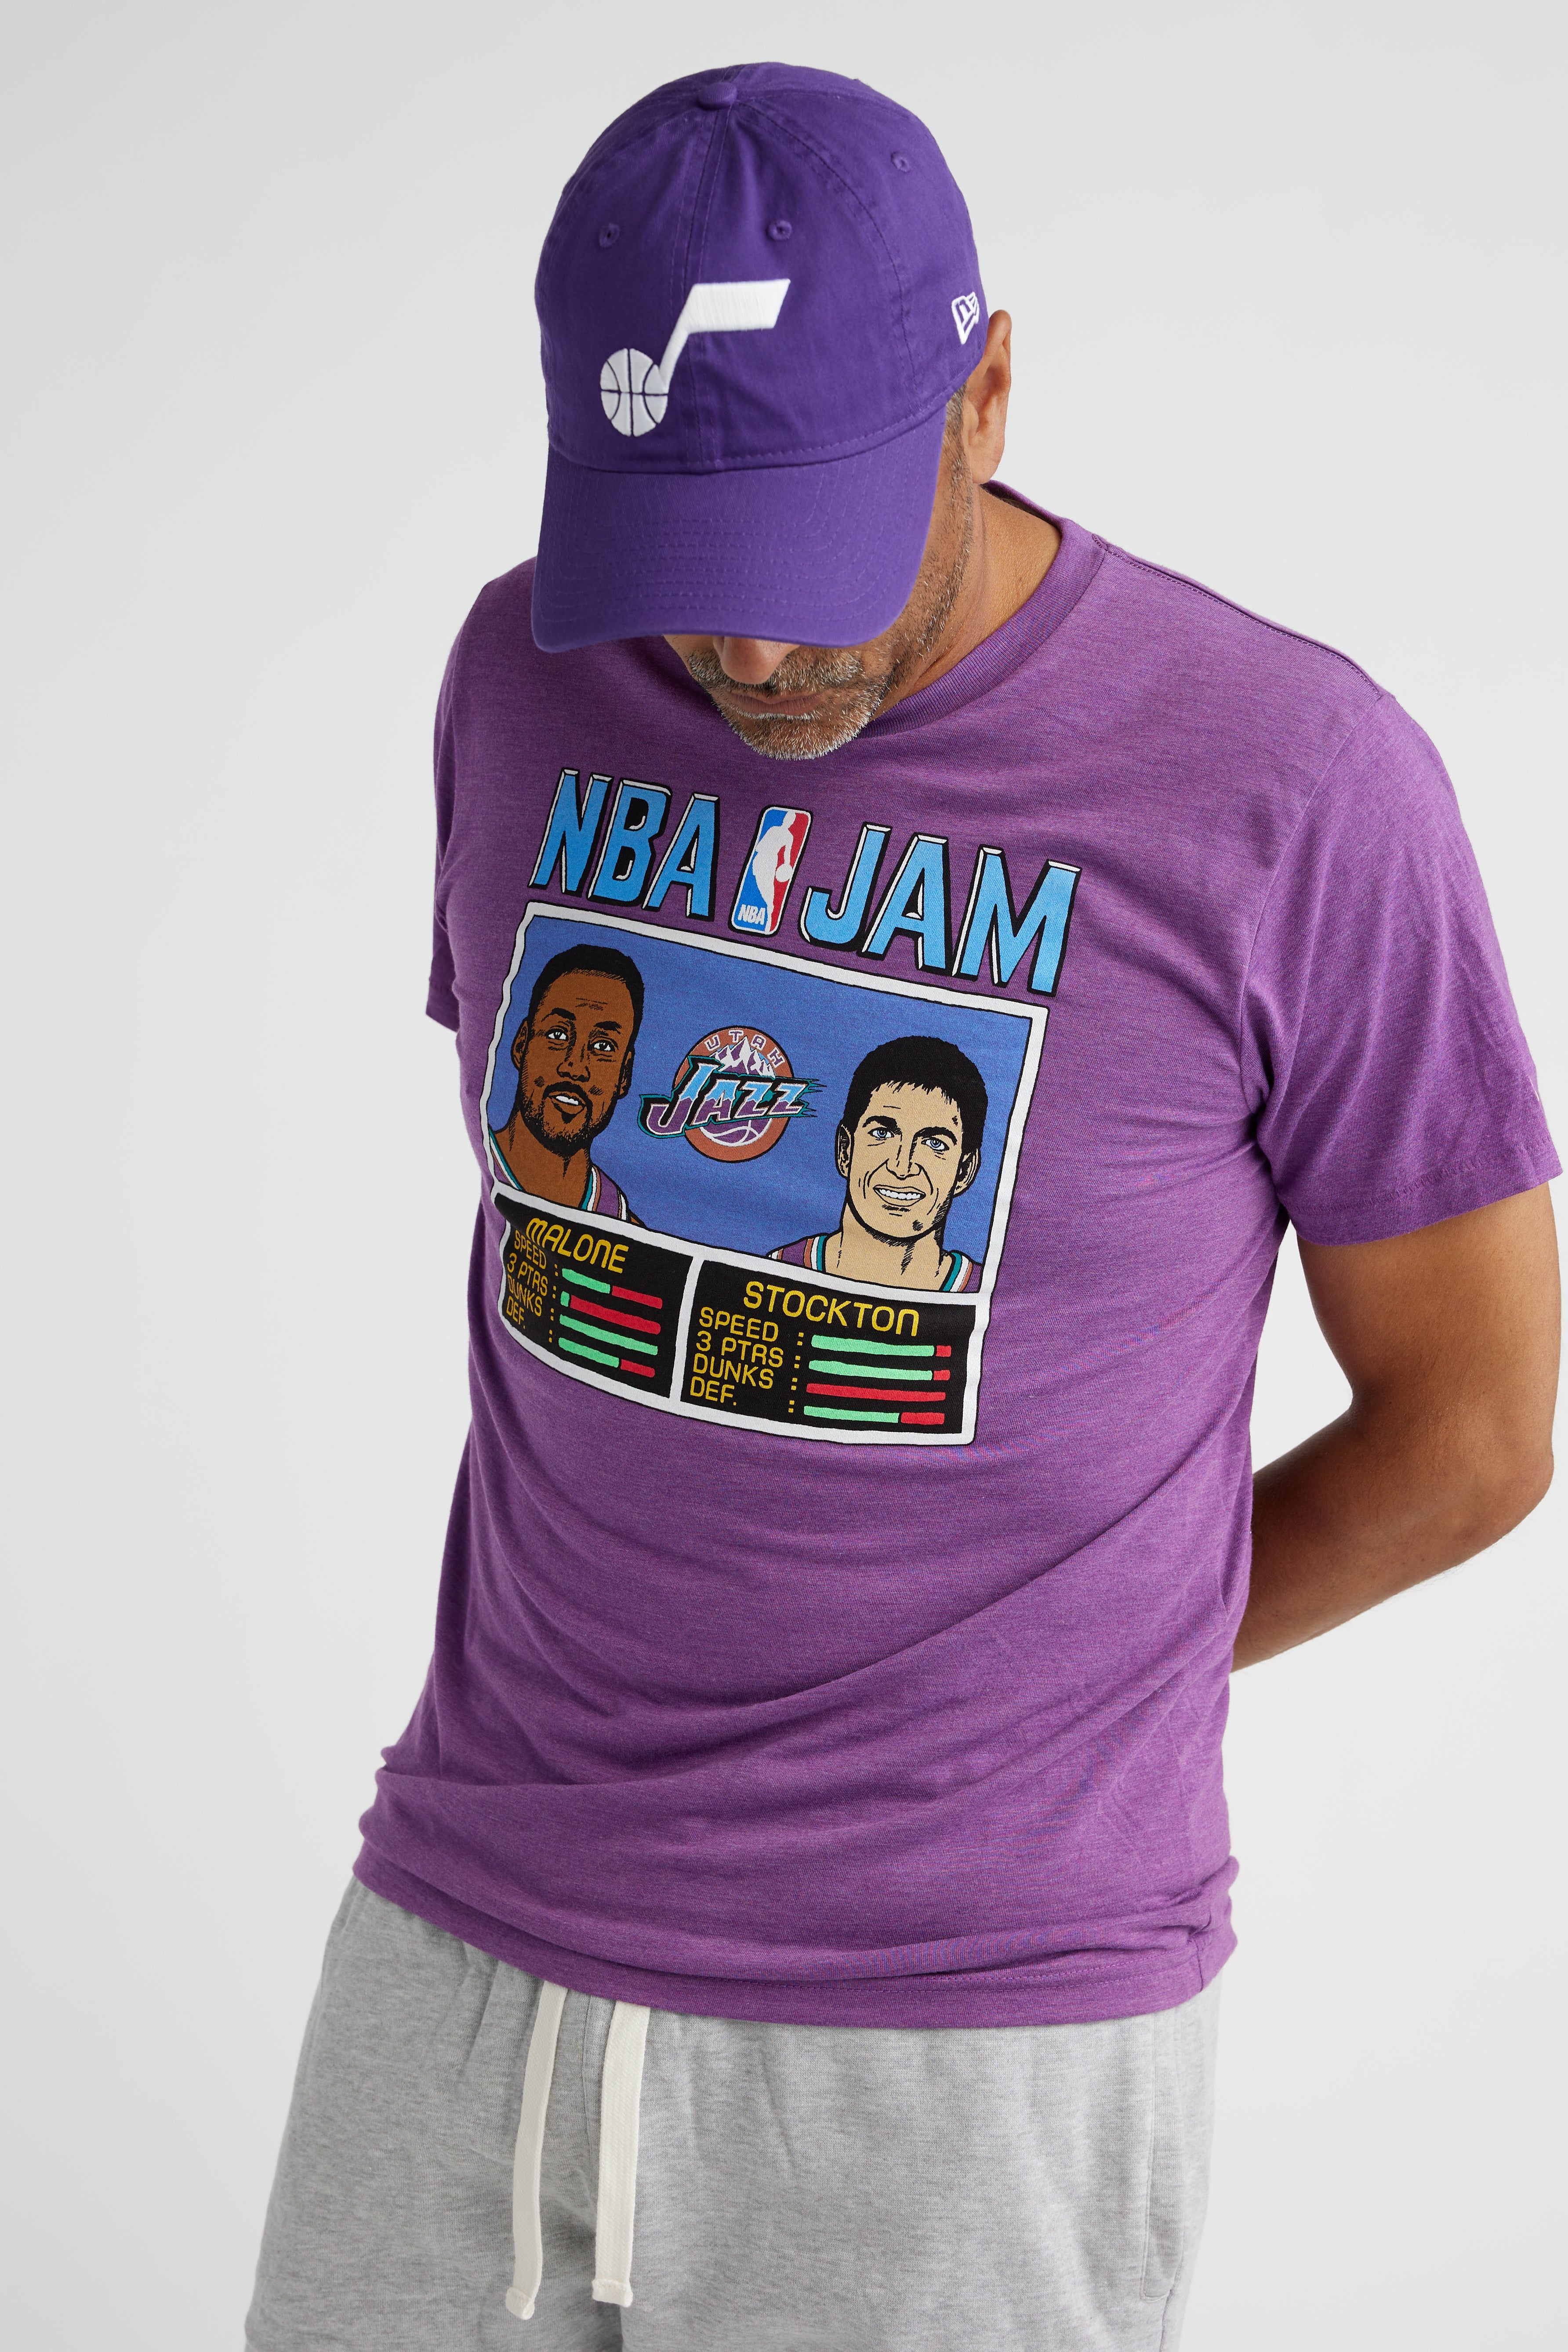 A man wearing the Purple NBA JAM homage tee featuring John Stockton and Karl Malone with their NBA JAm game stats below